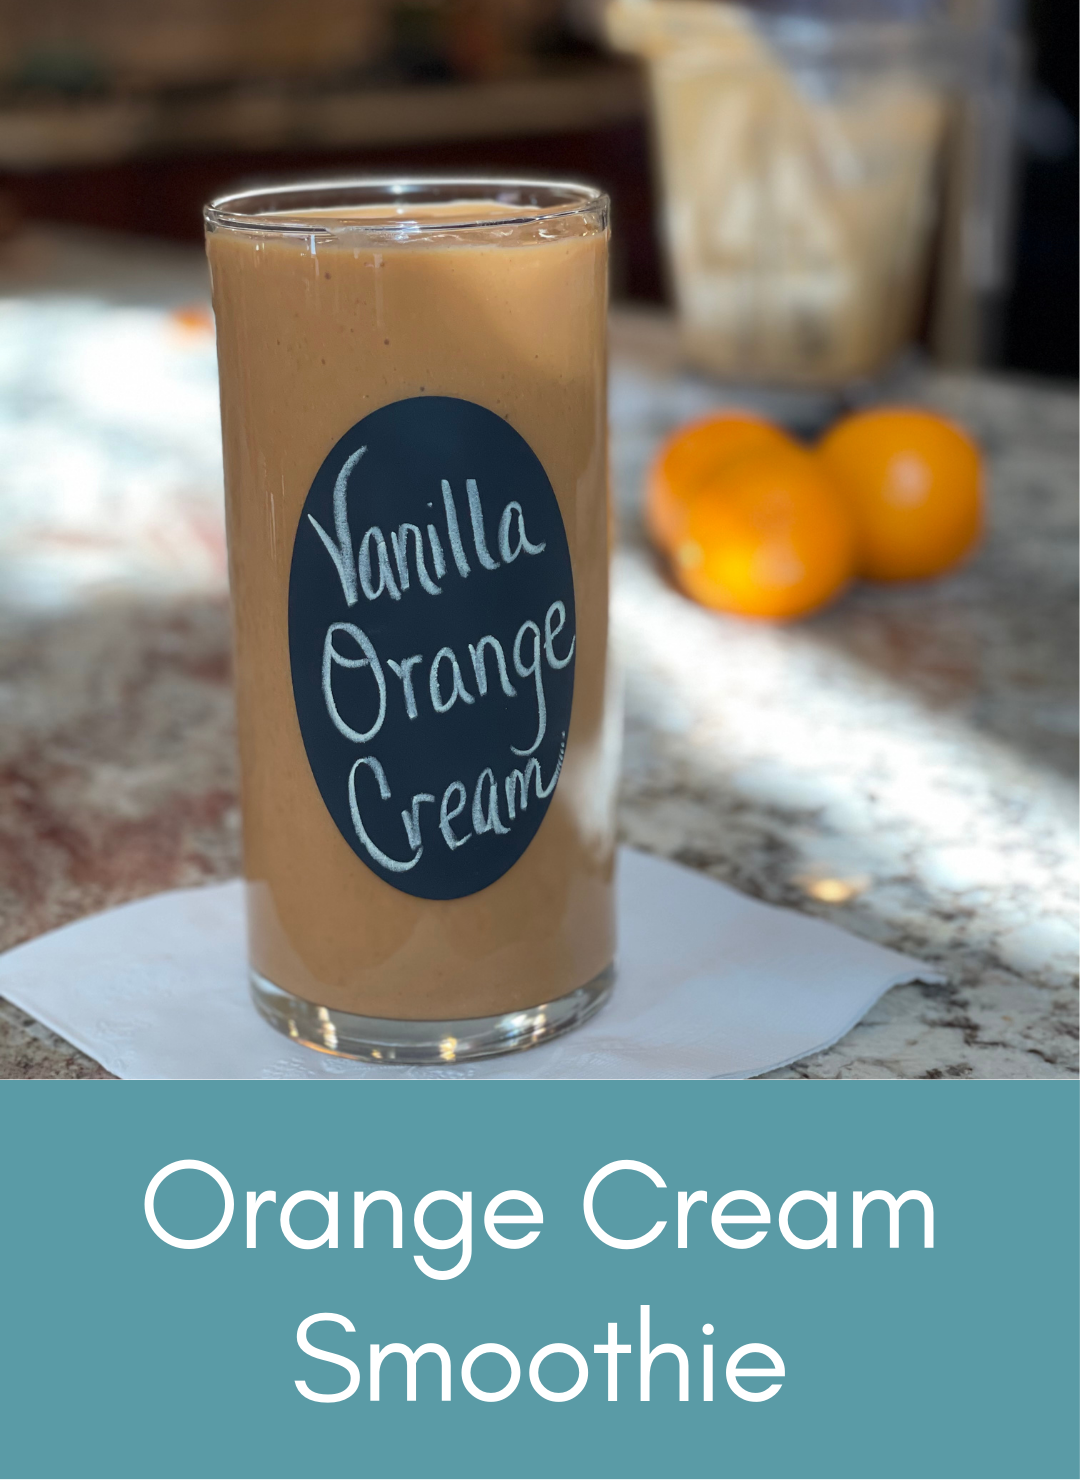 Vanilla protein orange cream whole food plant based vegan smoothie Picture with link to recipe